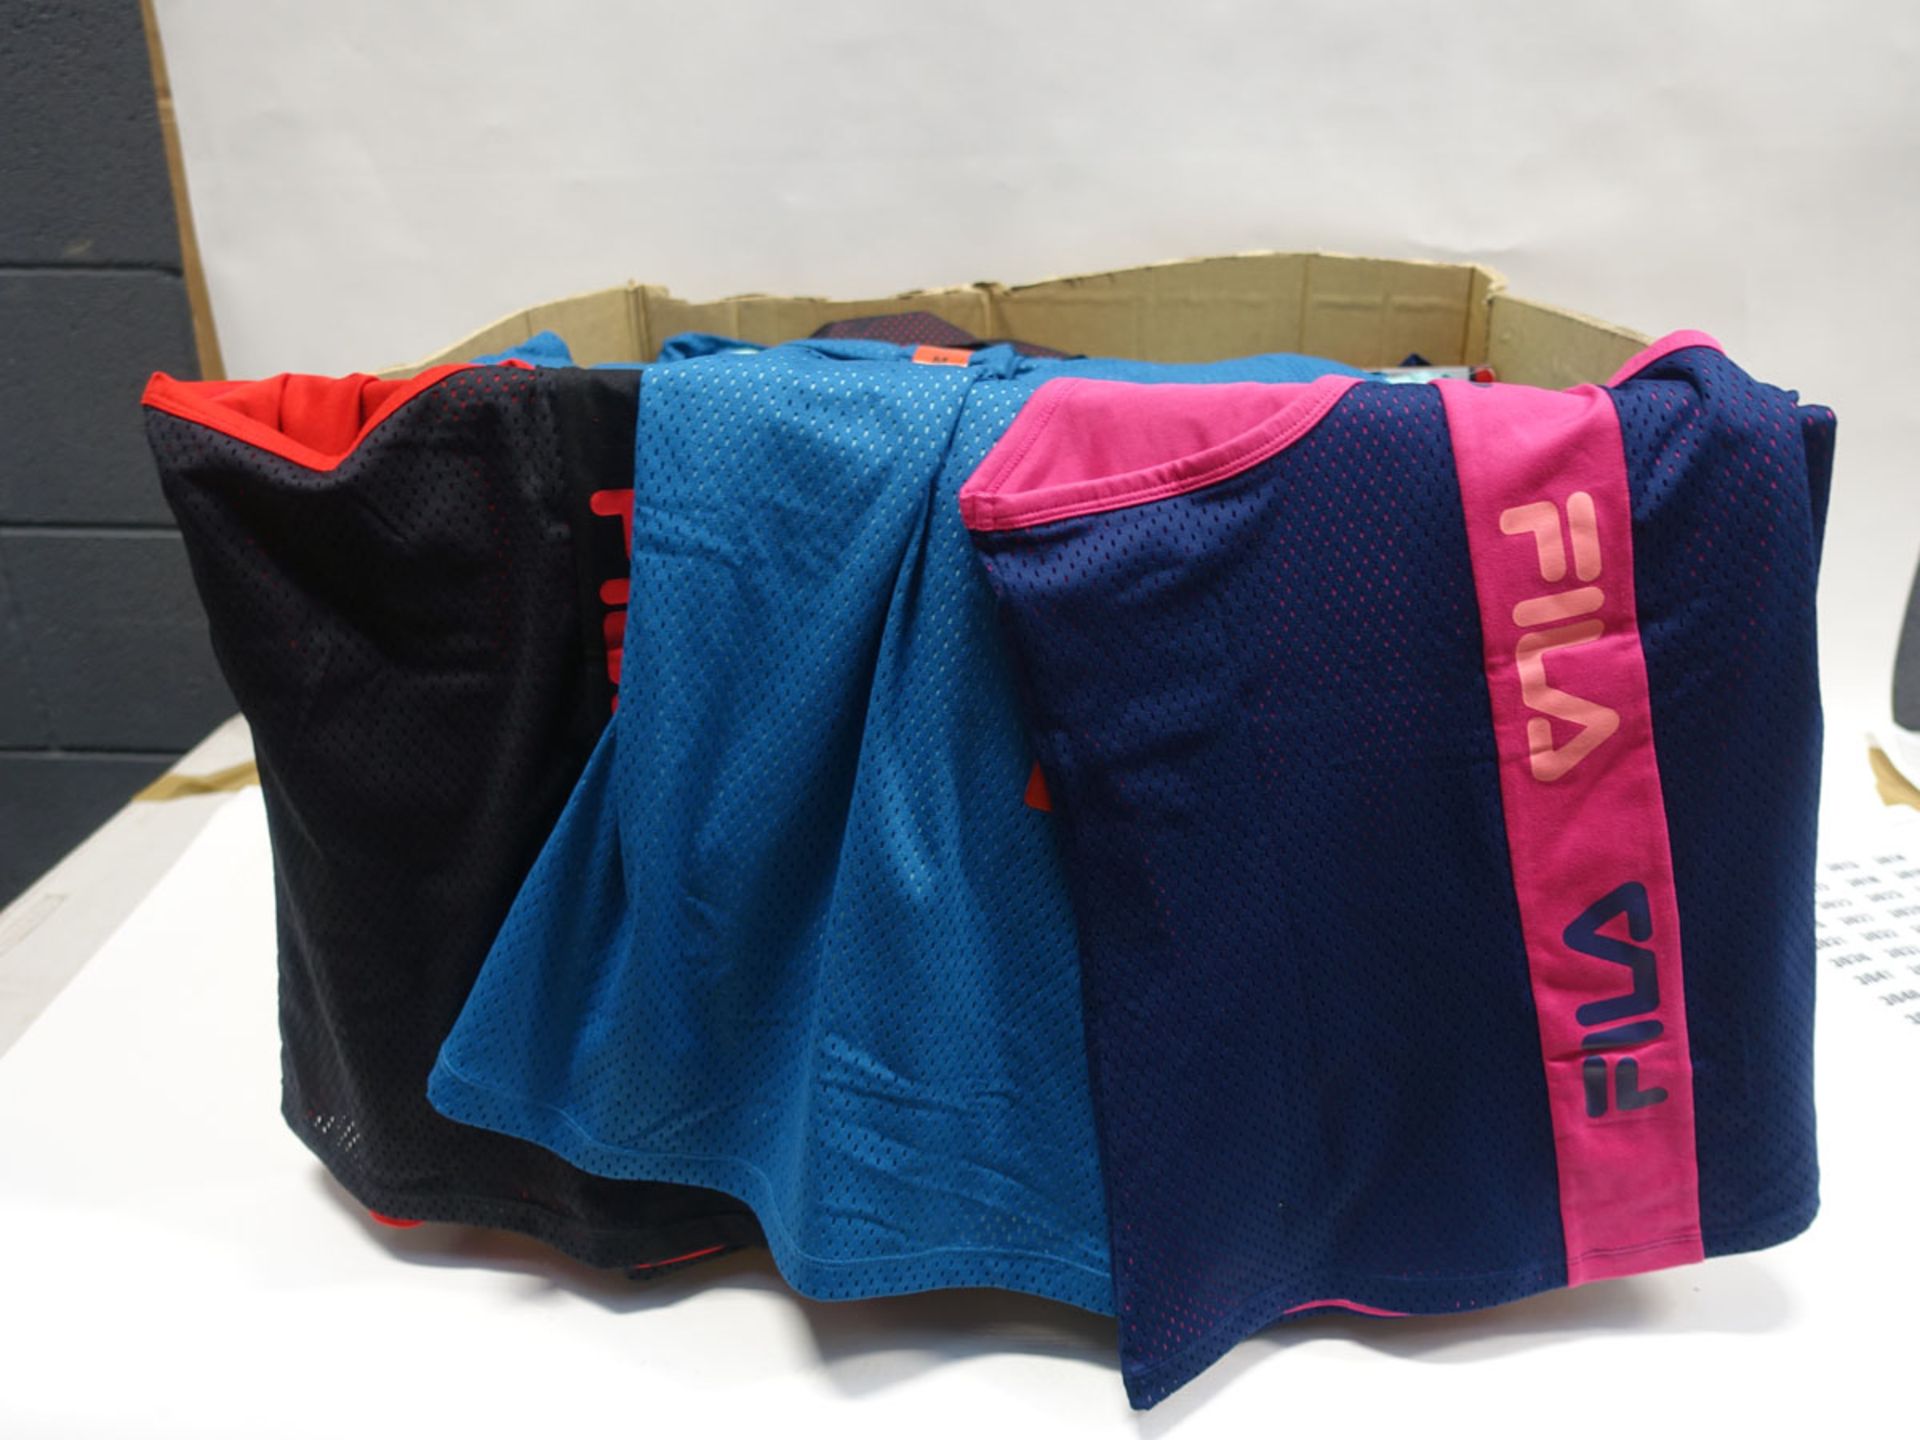 Box containing approx 160 Fila ladies mesh overlay tank tops sizes varying from large to small in